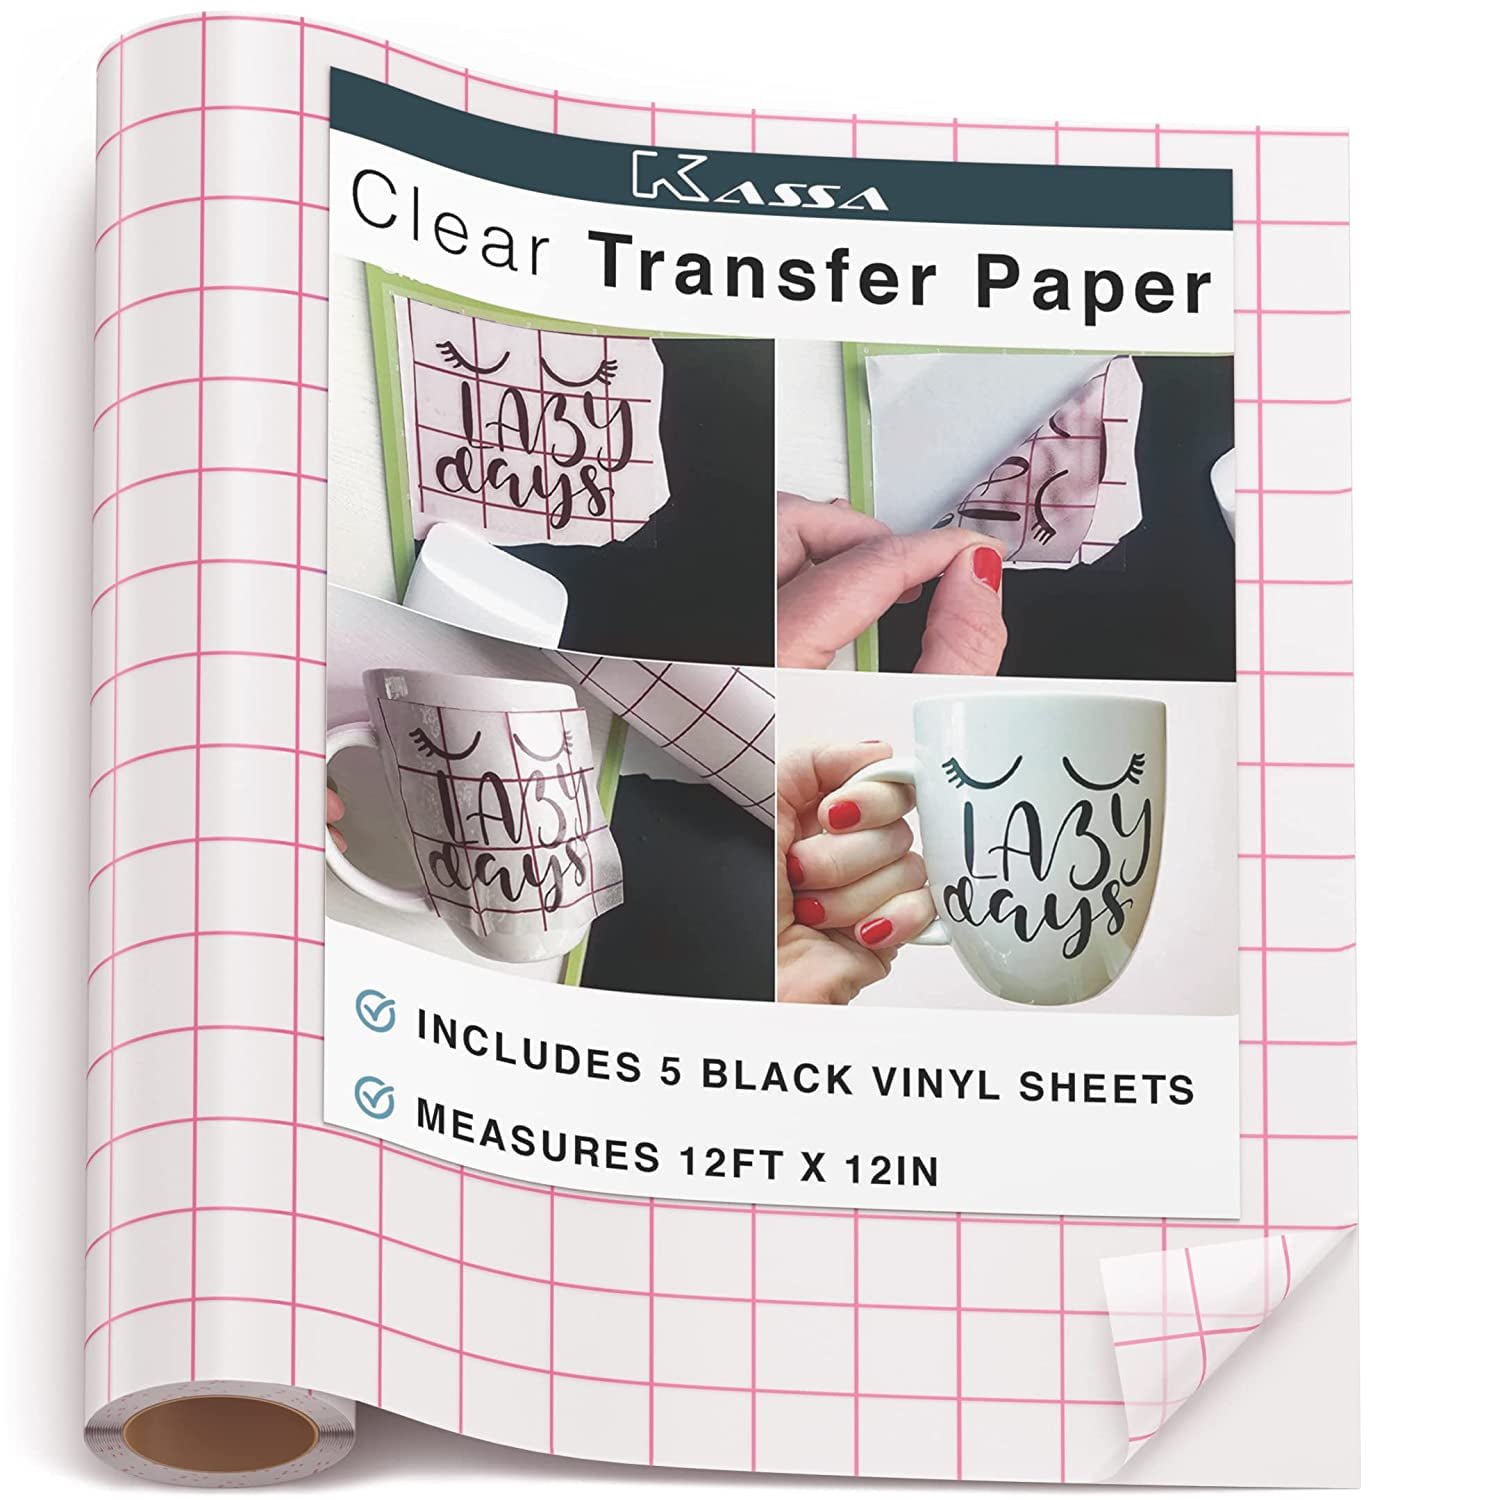 How to Use Vinyl Transfer Paper (Vinyl Transfer Tape) - Pins and